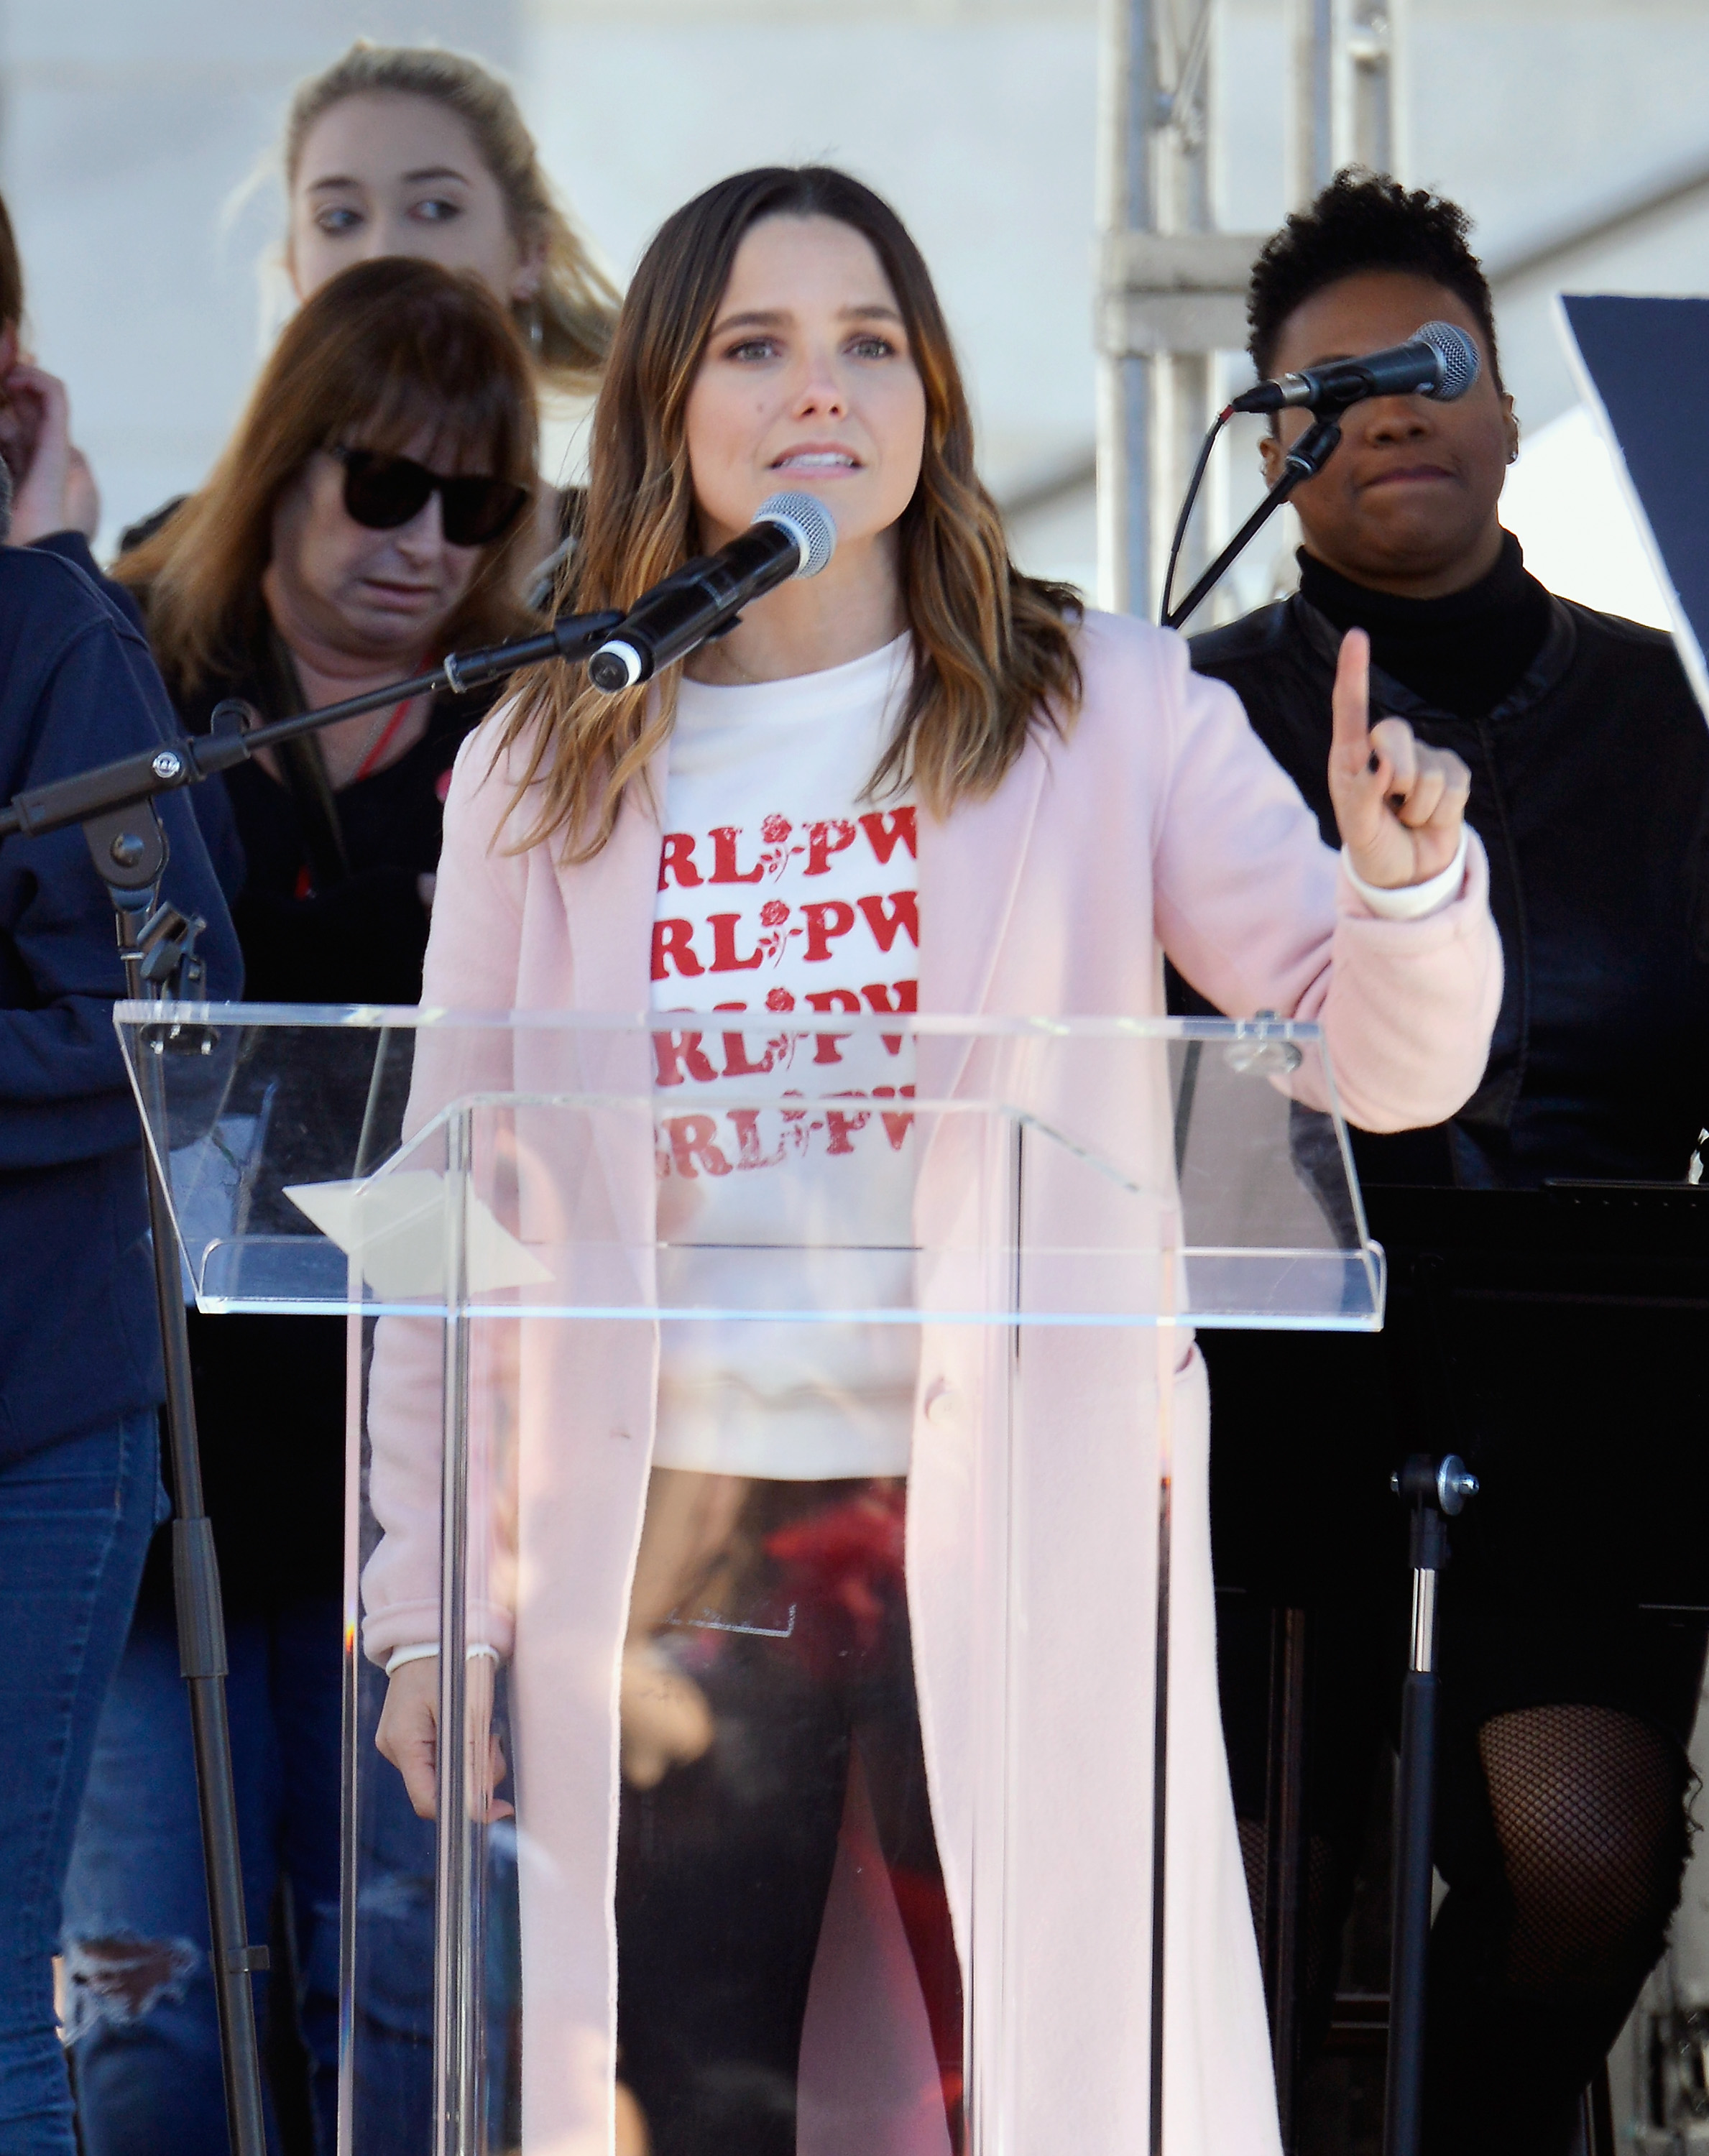 Actor Sophia Bush speaks during the Women's March Los Angeles 2018 on January 20, 2018 in Los Angeles, California. (Photo by Chelsea Guglielmino/Getty Images)